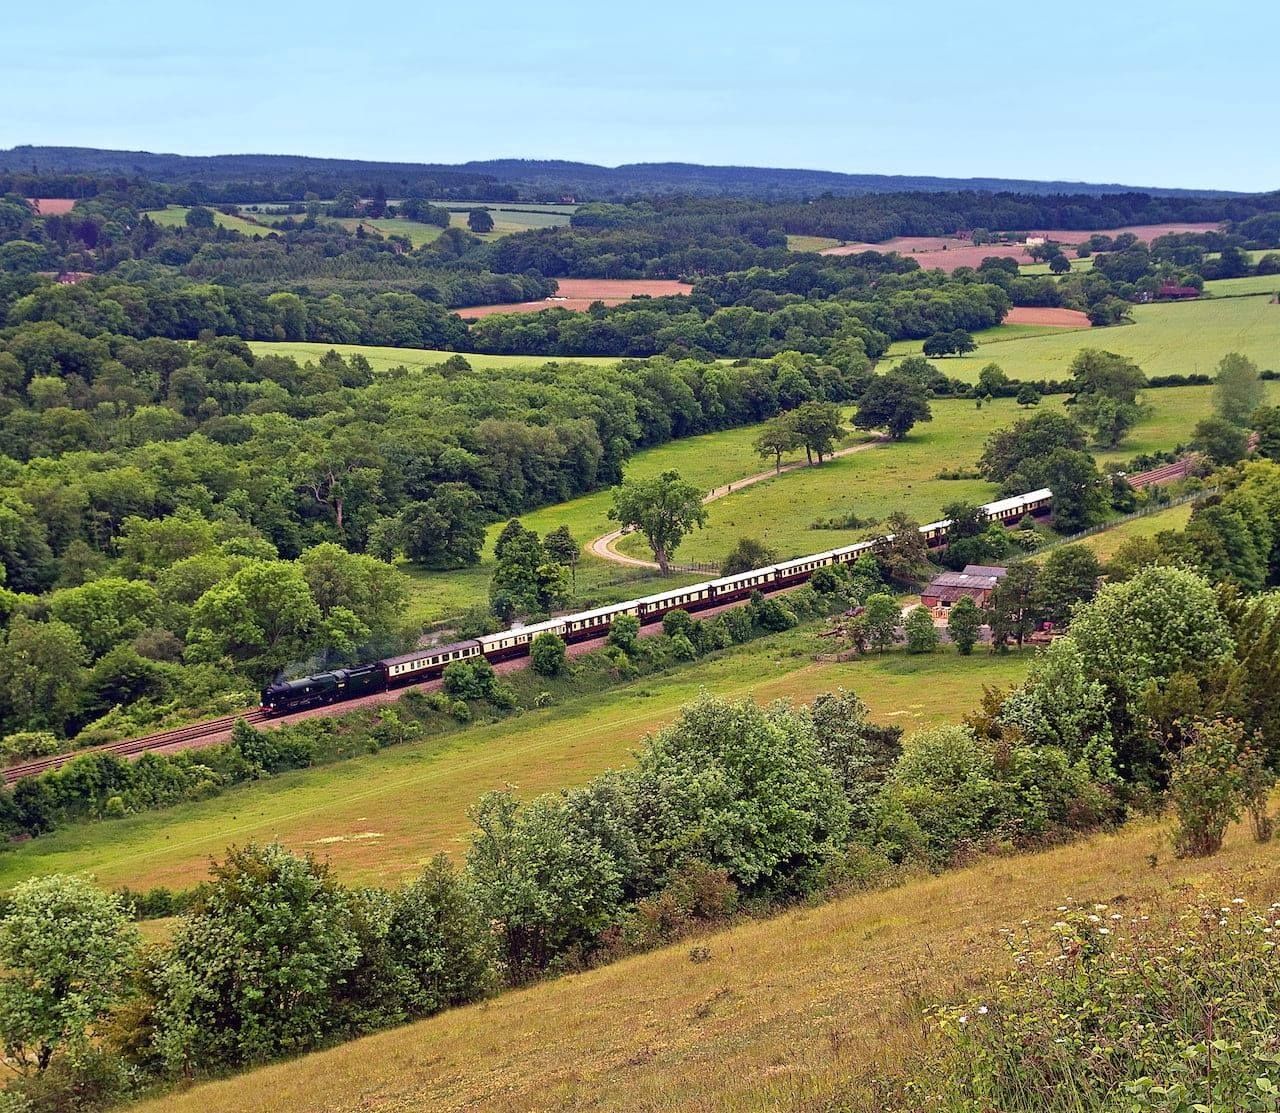 This Train Trip Through the English Countryside Is Launching for